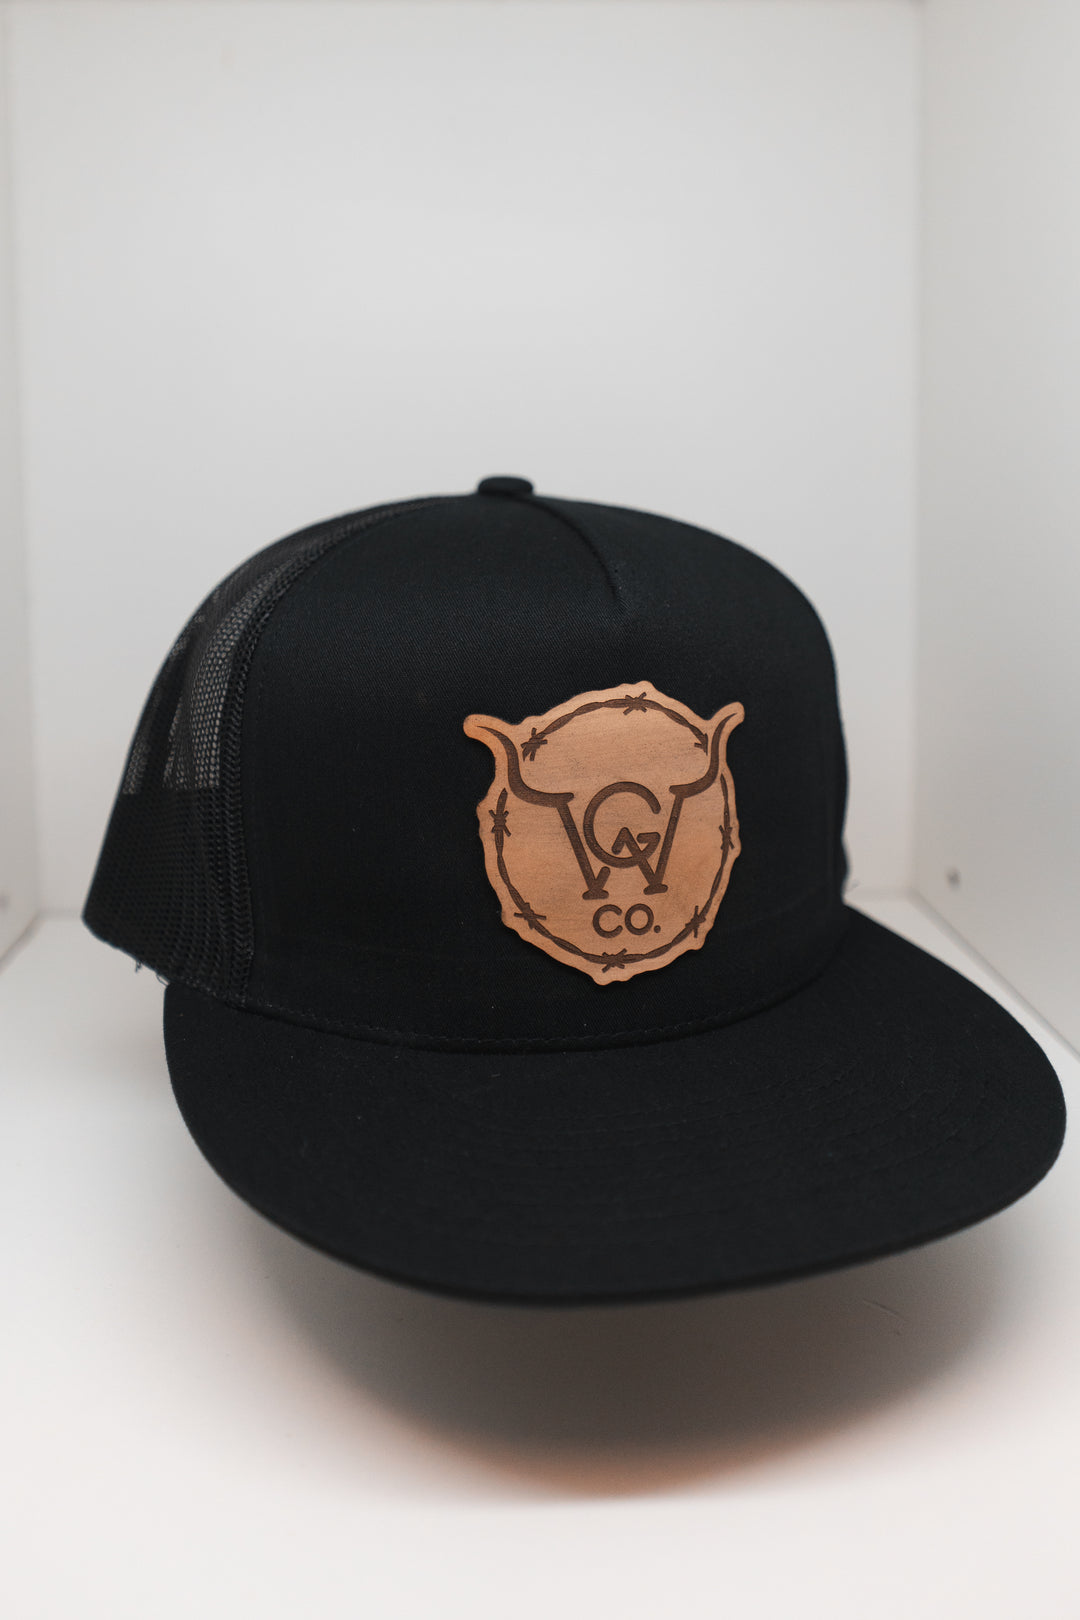 WGC Leather Patch - Black Hat